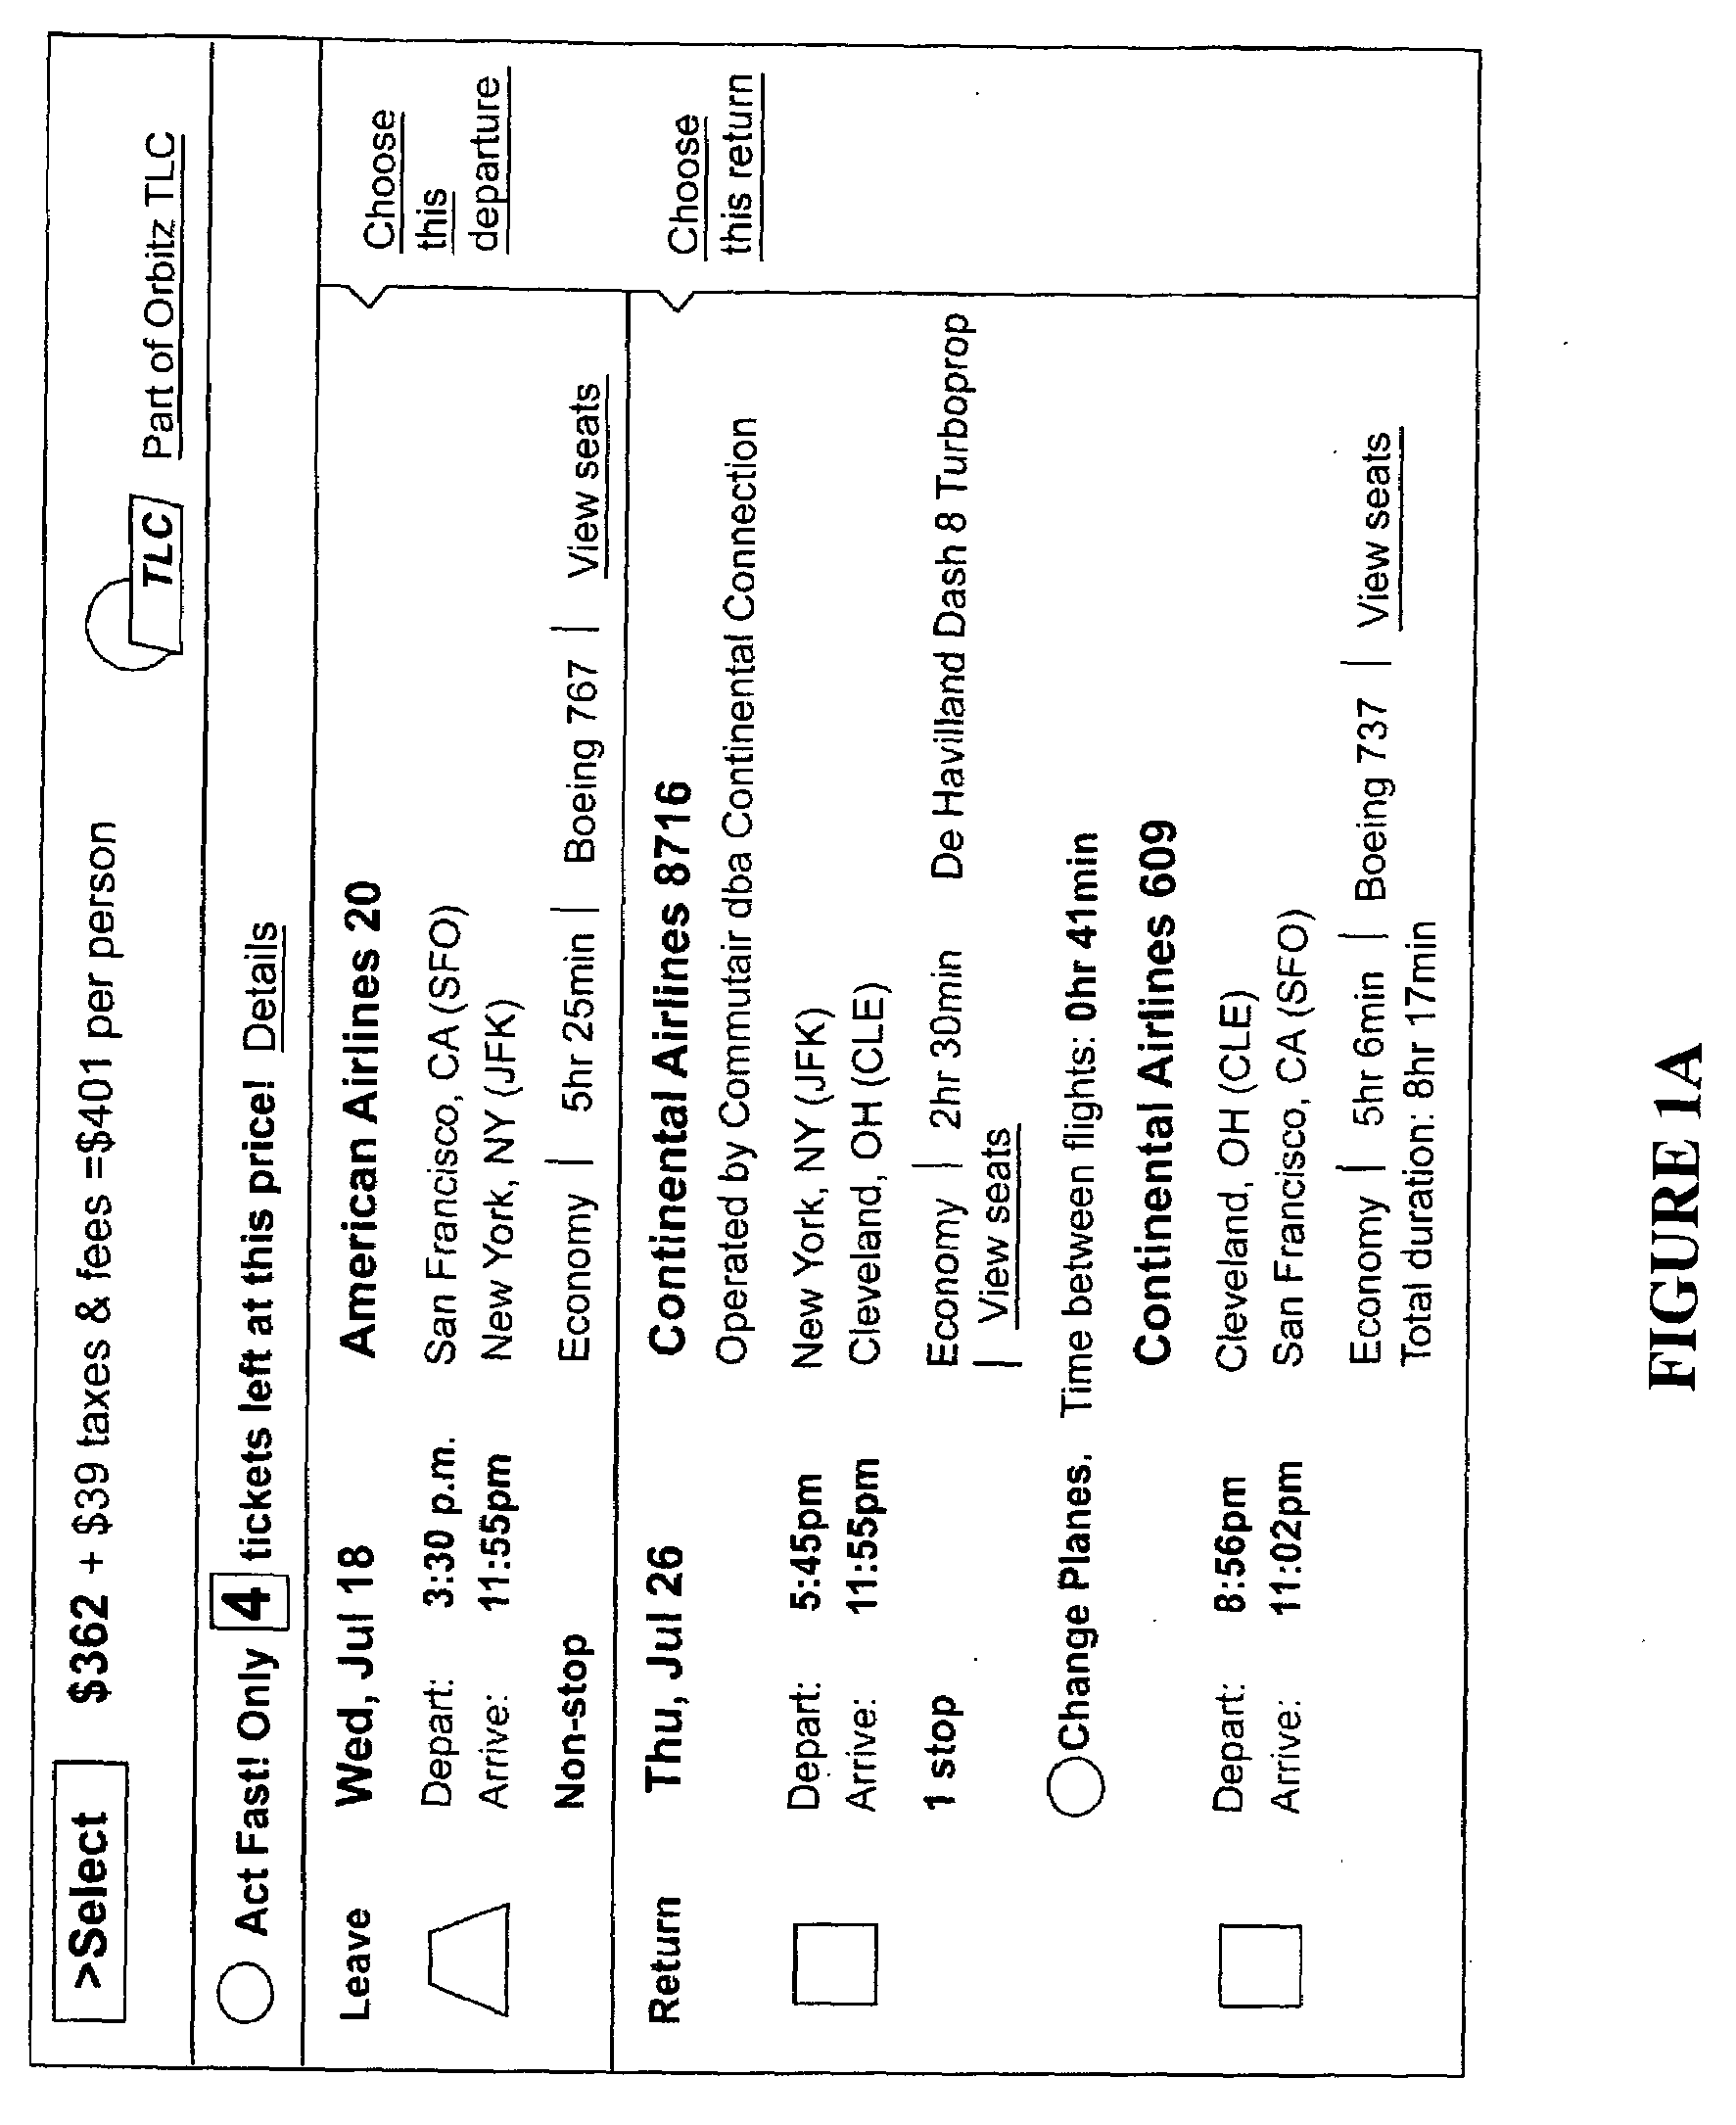 Architecture and system for displaying schedule and route information